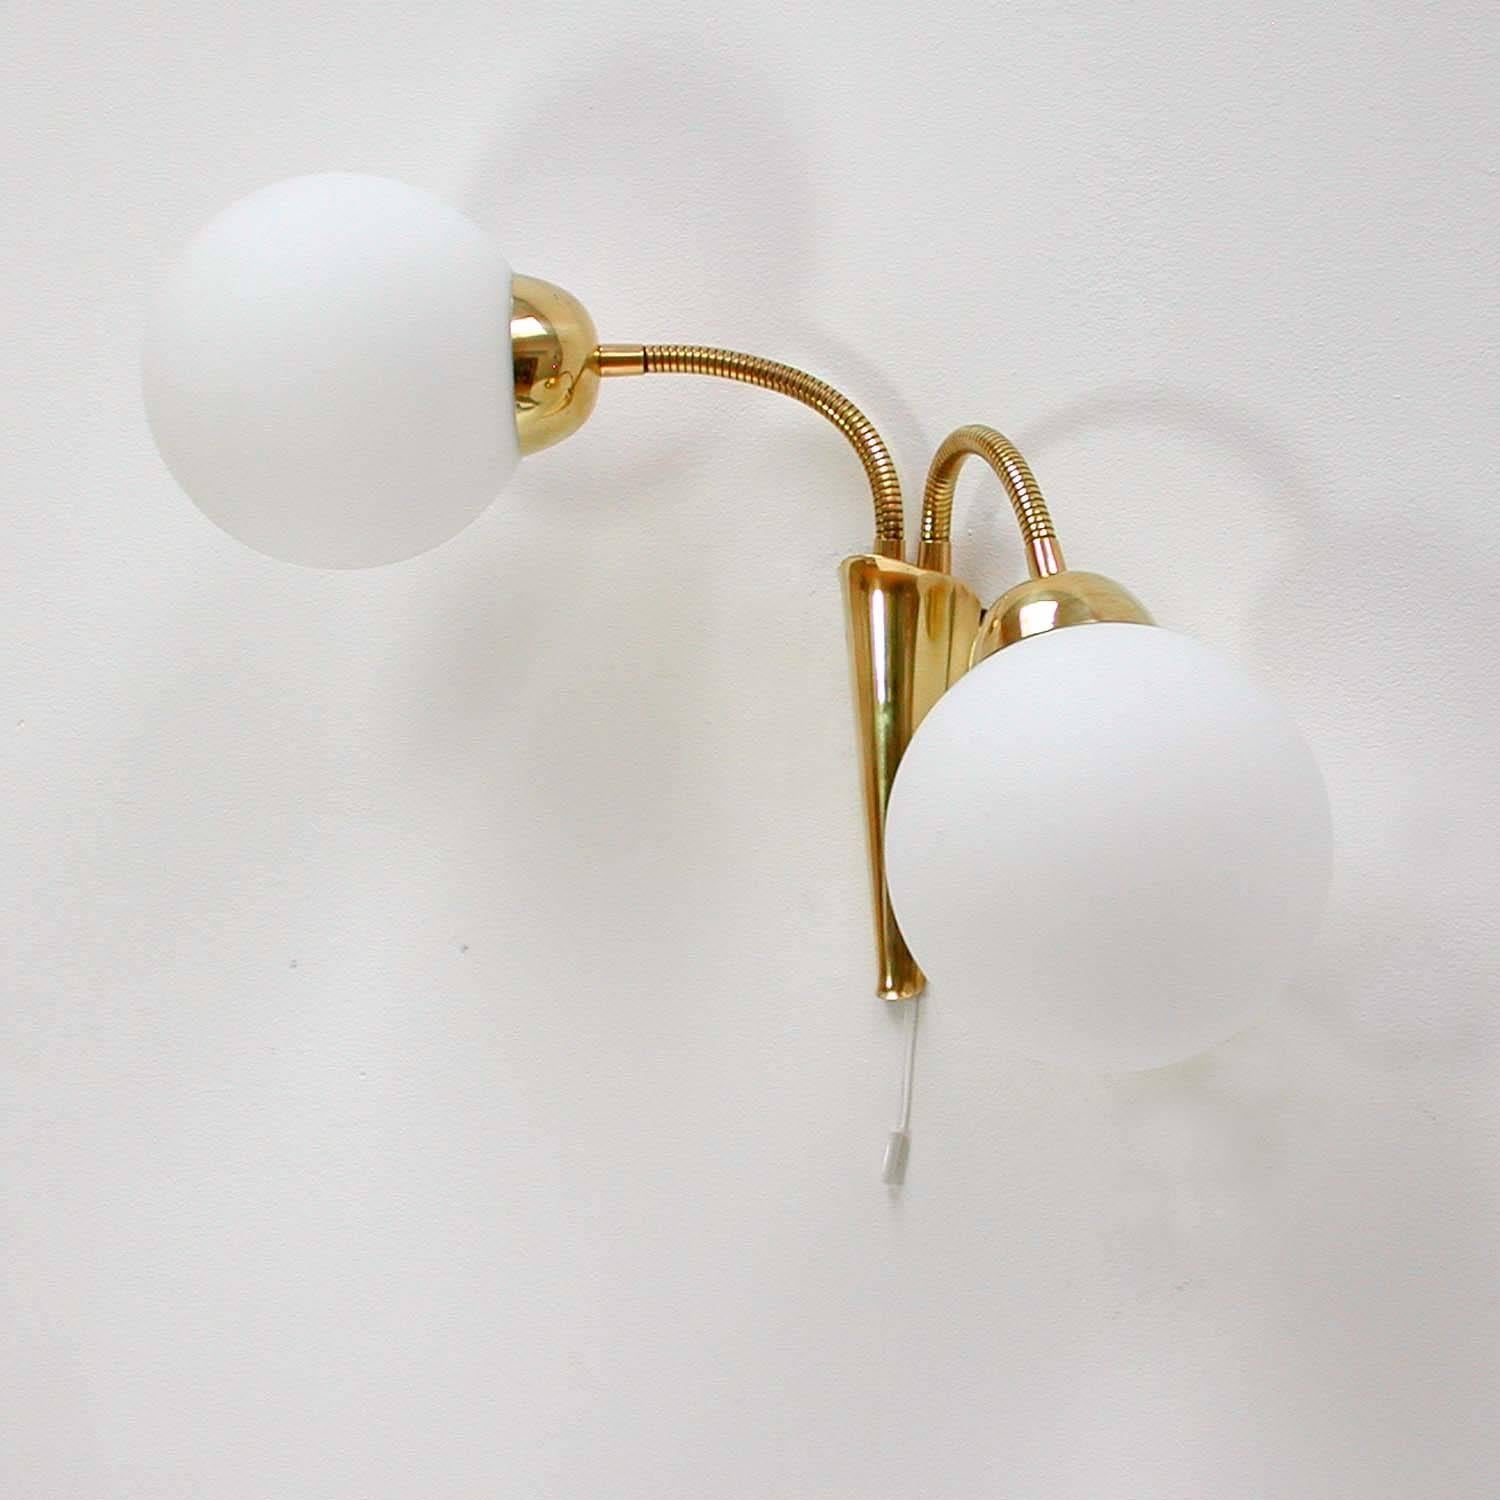 Mid-20th Century Midcentury Italian Double-Gooseneck Brass and Opal Glass Sconce, 1950s For Sale